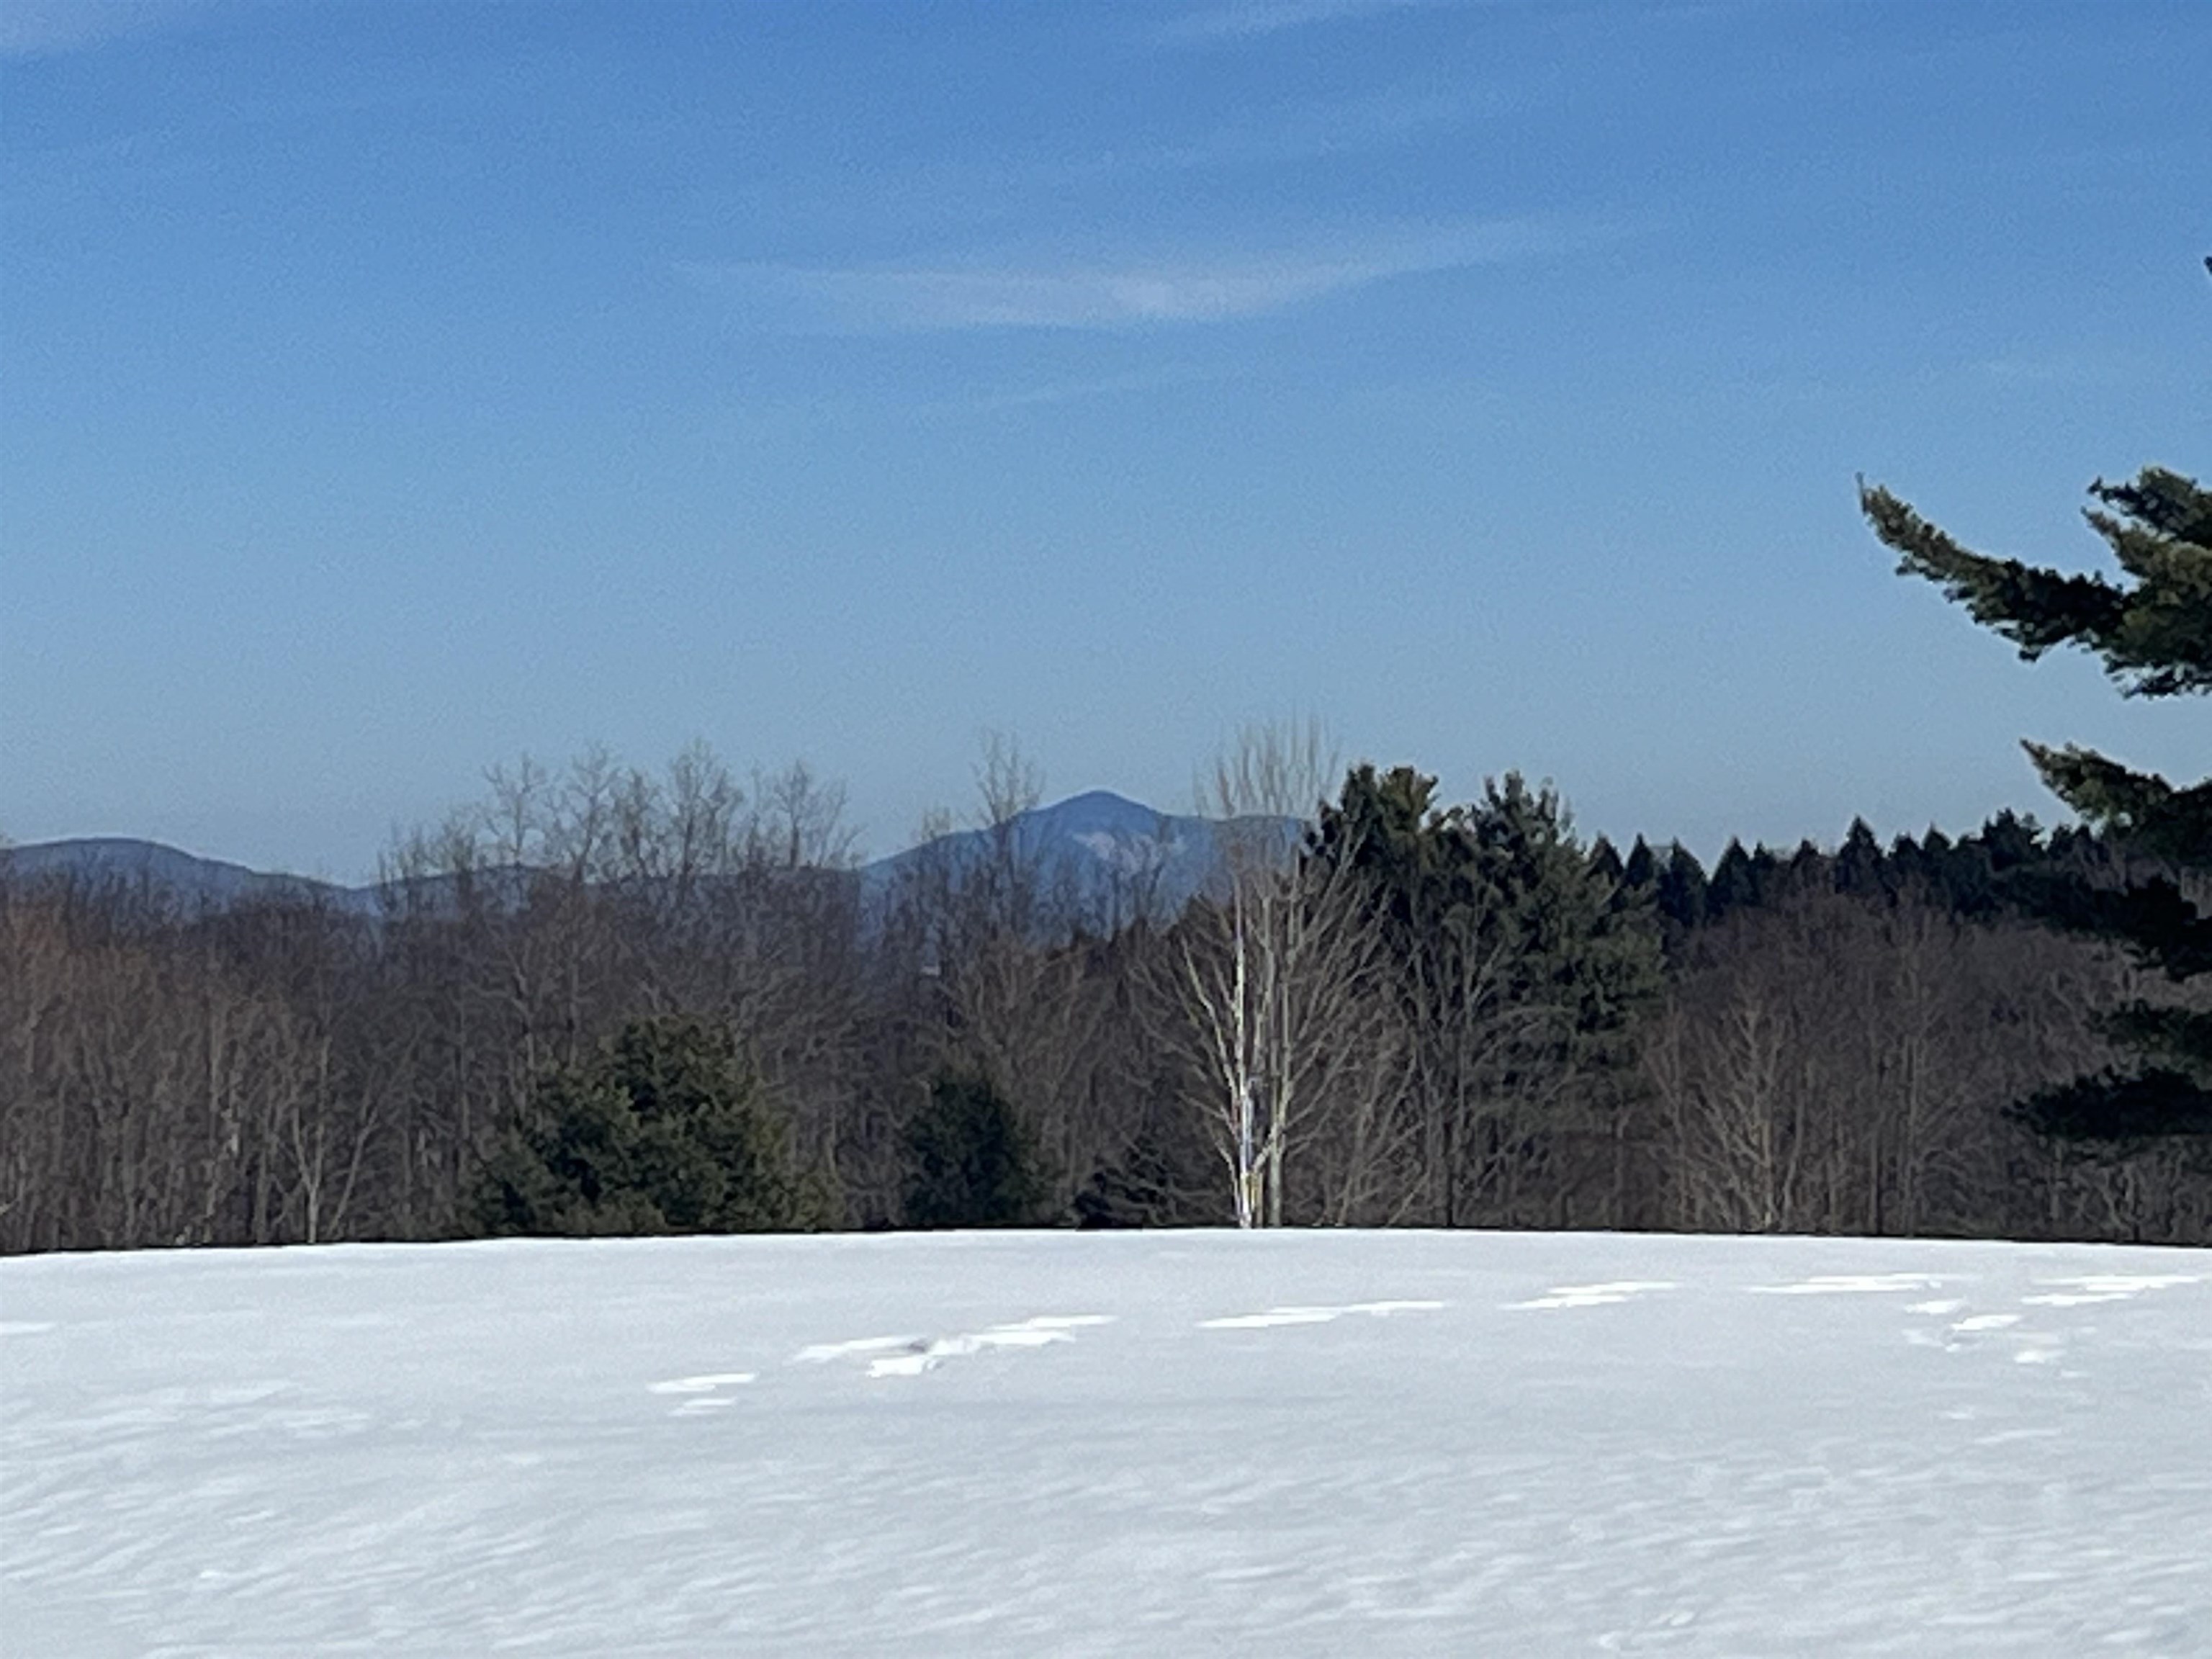 ANDOVER VT Land / Acres for sale